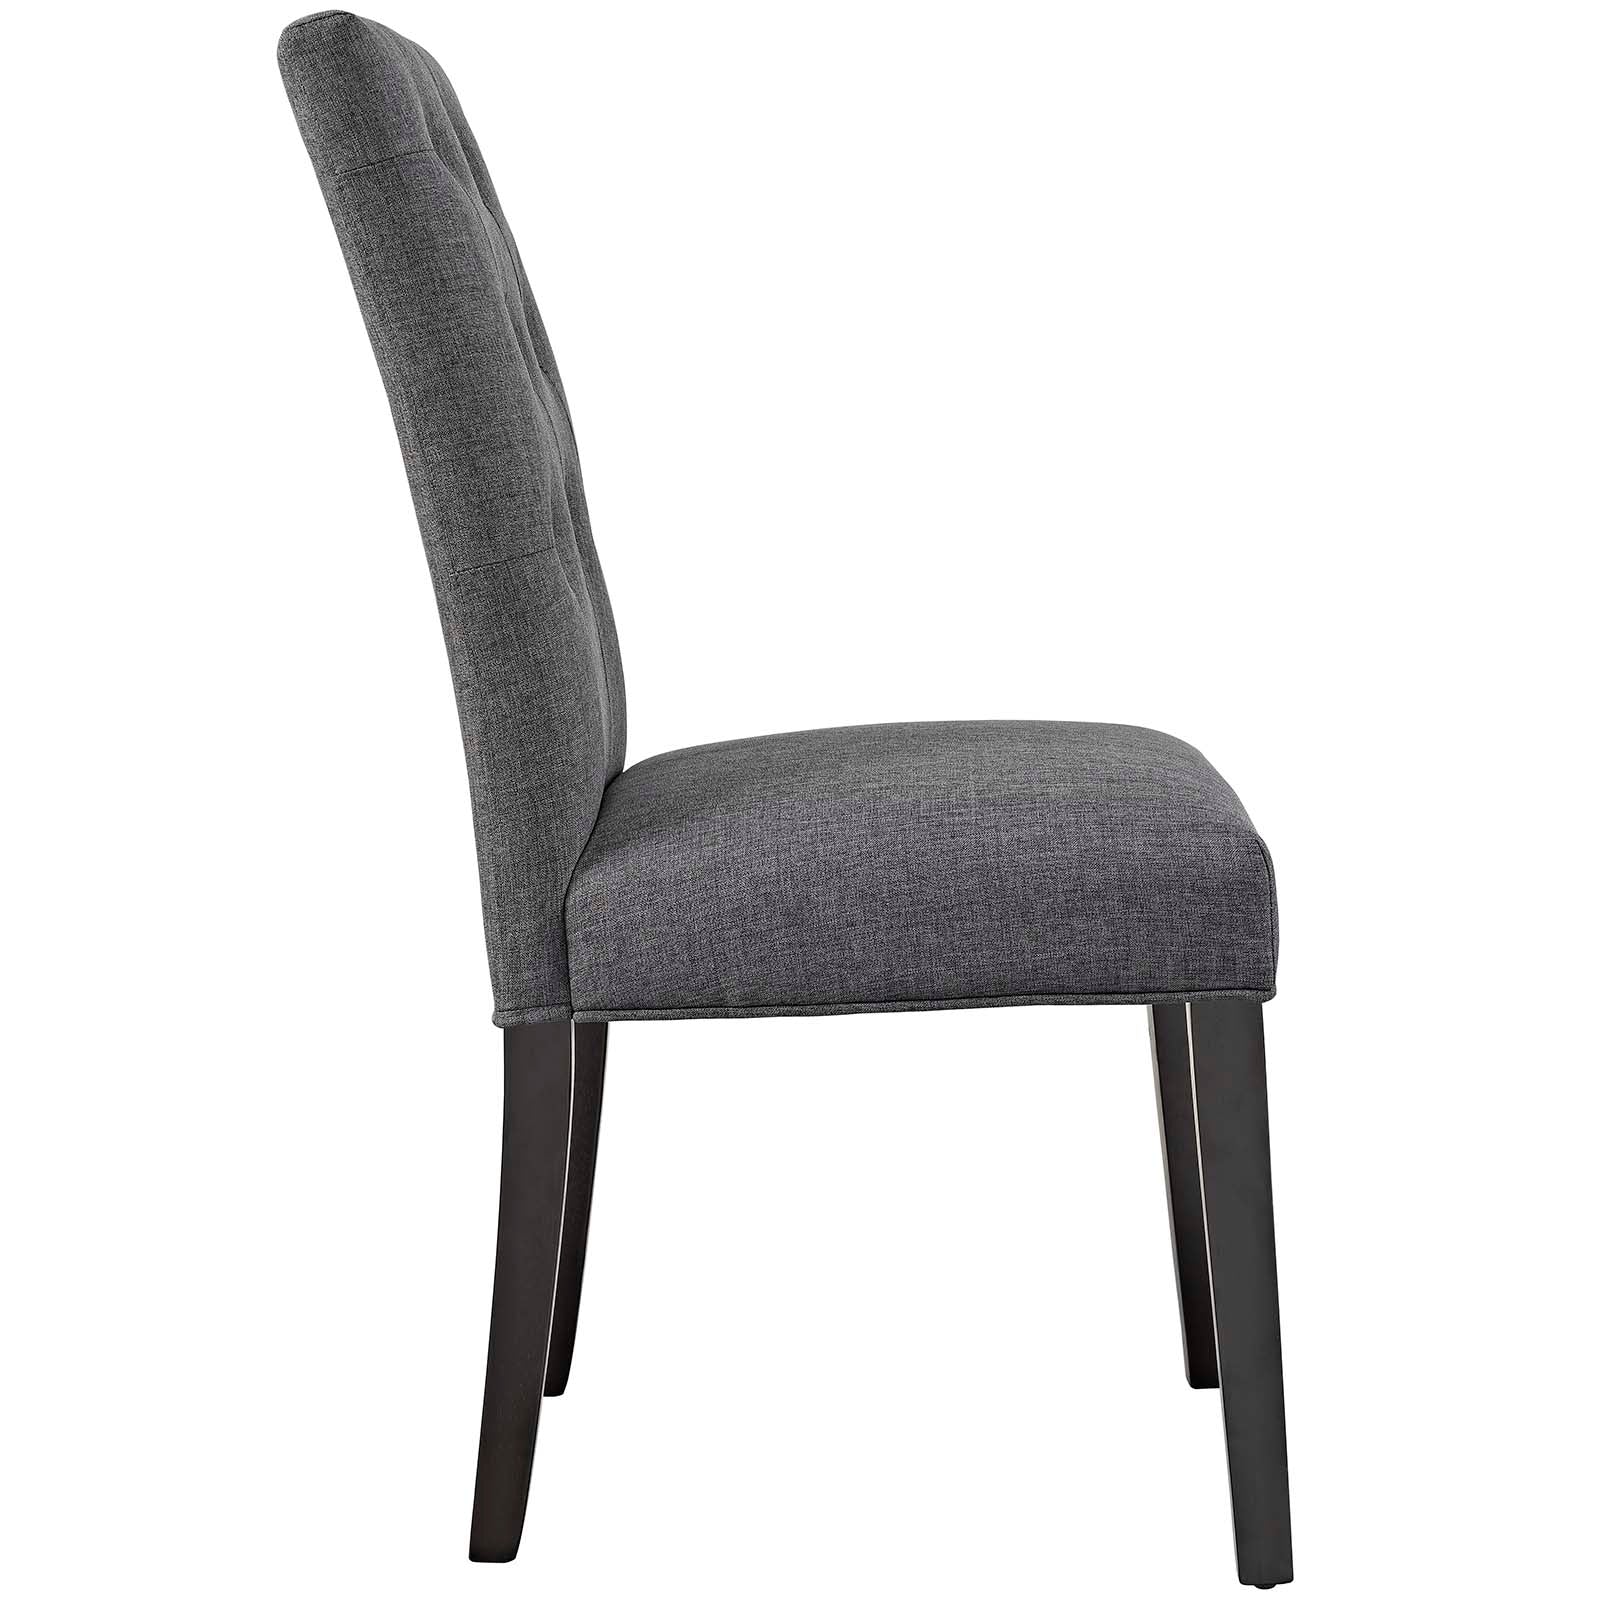 Modway Dining Chairs - Confer Dining Side Chair Fabric Set of 2 Gray